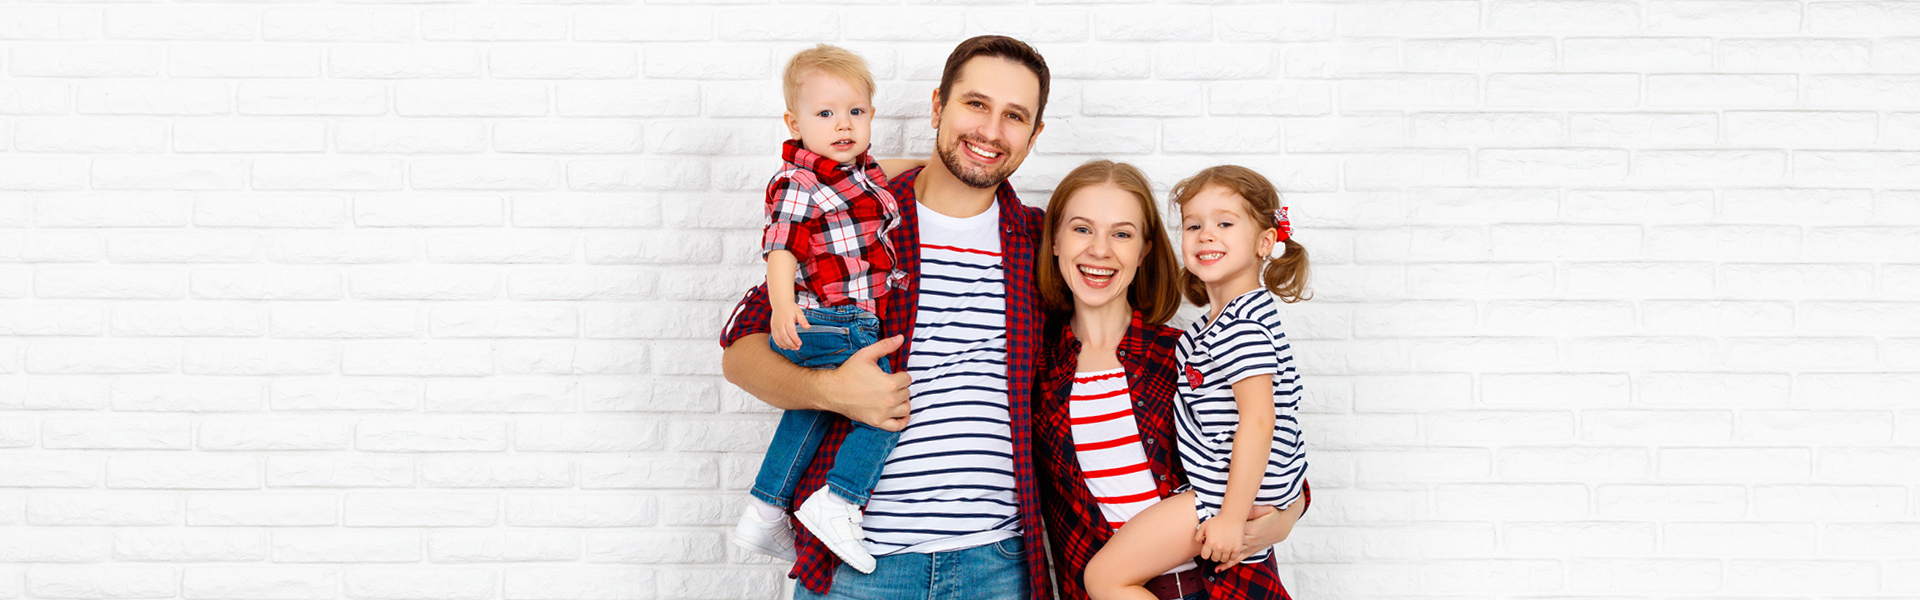 What is Family Dentistry?